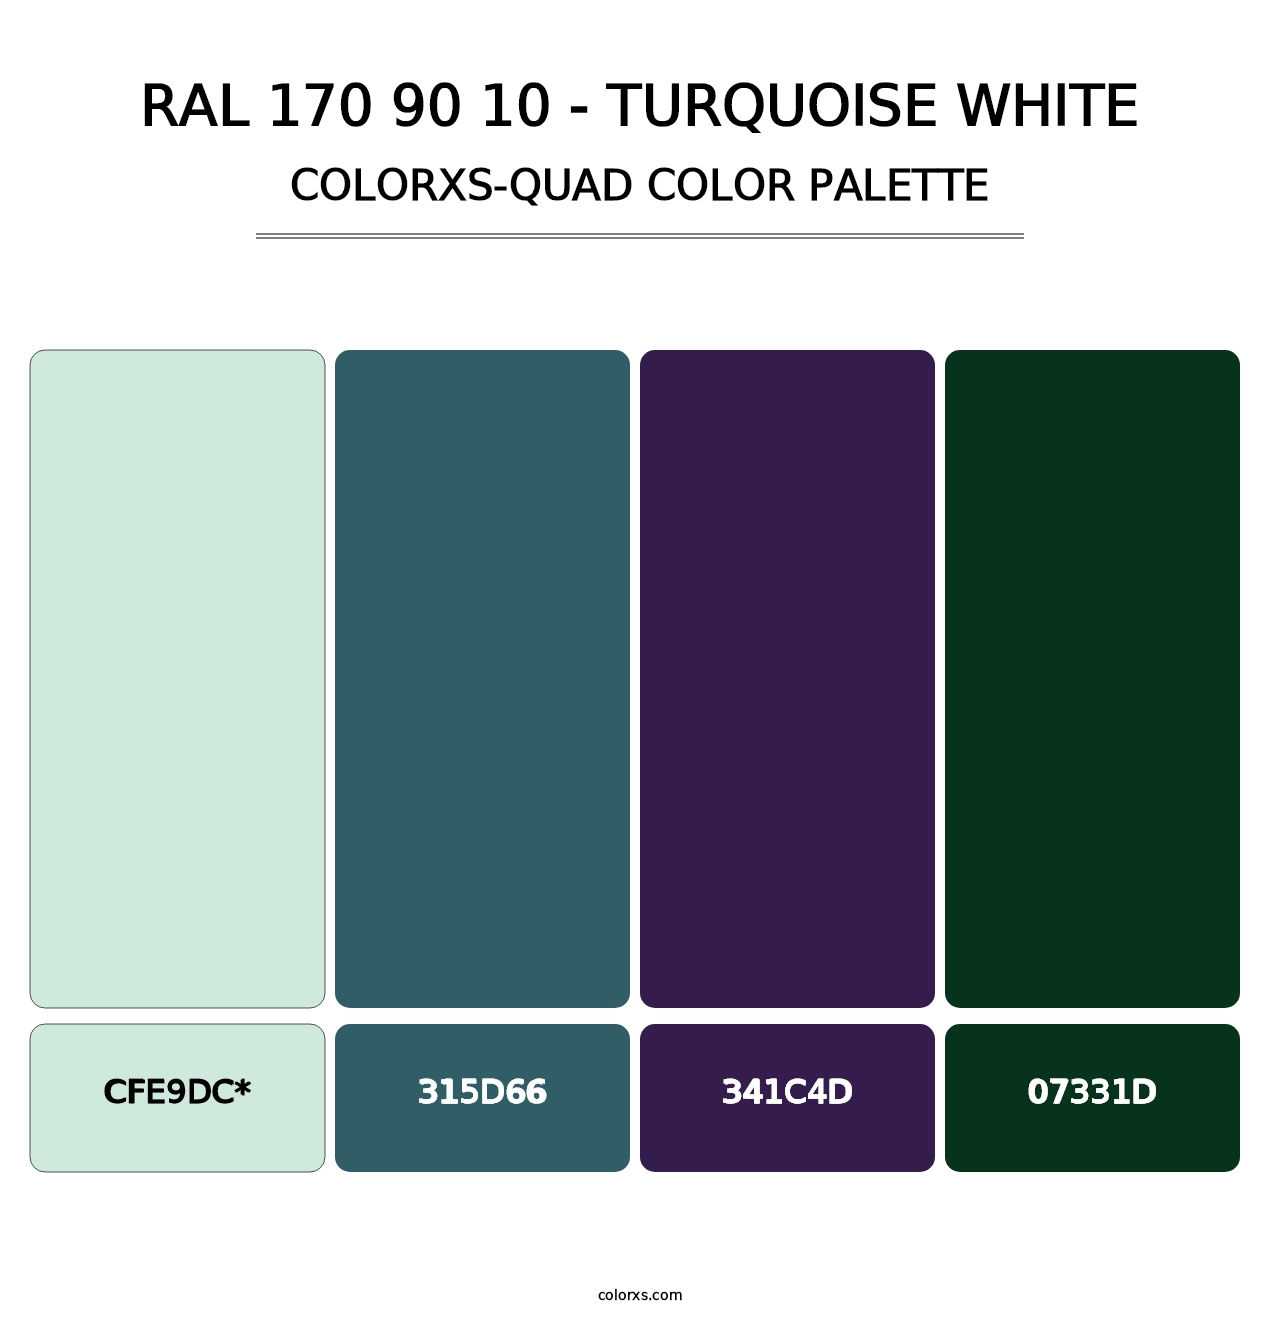 RAL 170 90 10 - Turquoise White - Colorxs Quad Palette